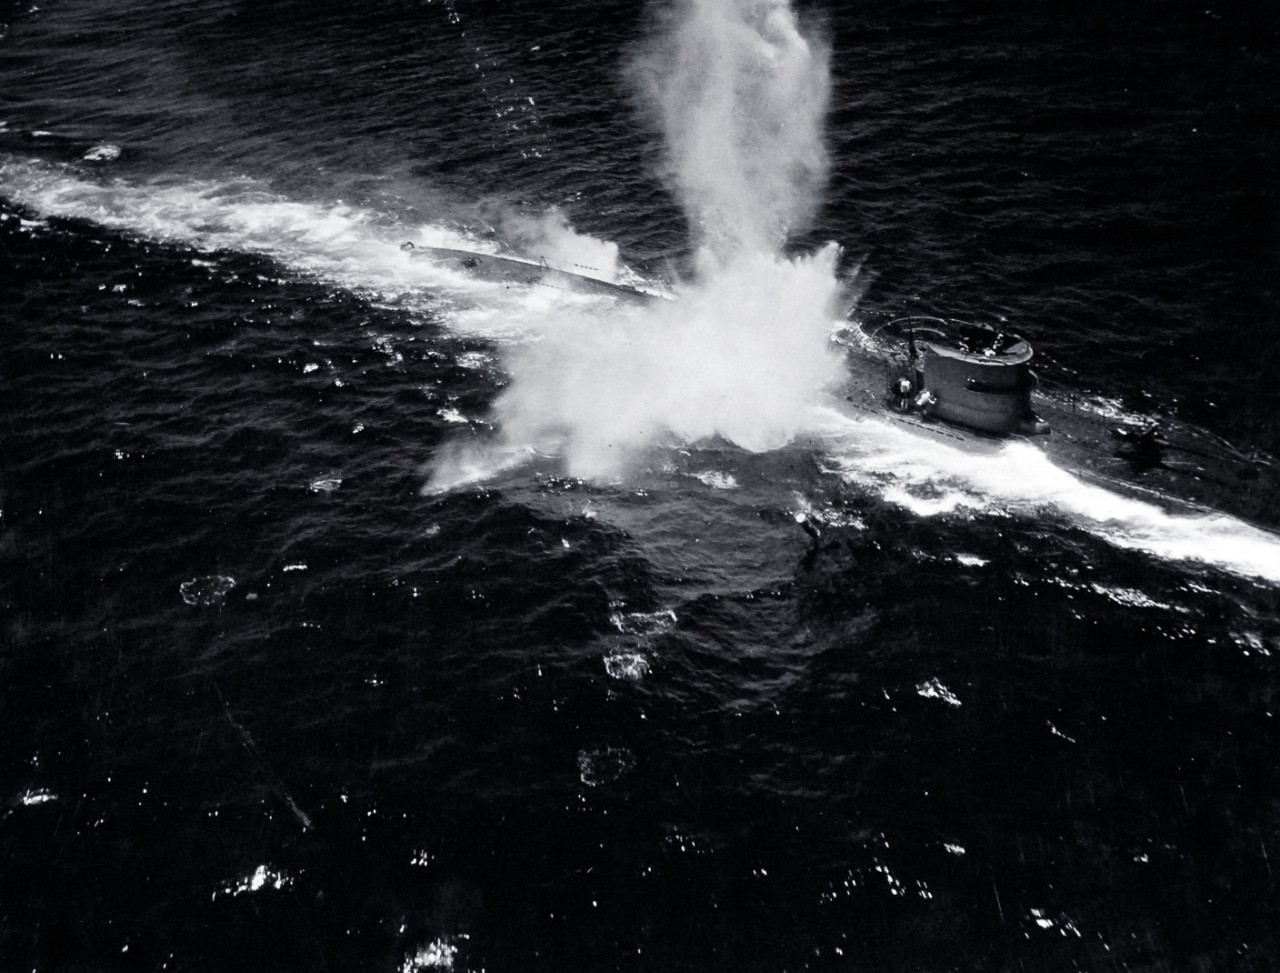 <p>80-G-68693: Air Attacks on German U-boats: WWII German U-boat, U-118, attacked and sunk by aircraft from USS Bogue (ACV 9), June 12, 1943.&nbsp;</p>
